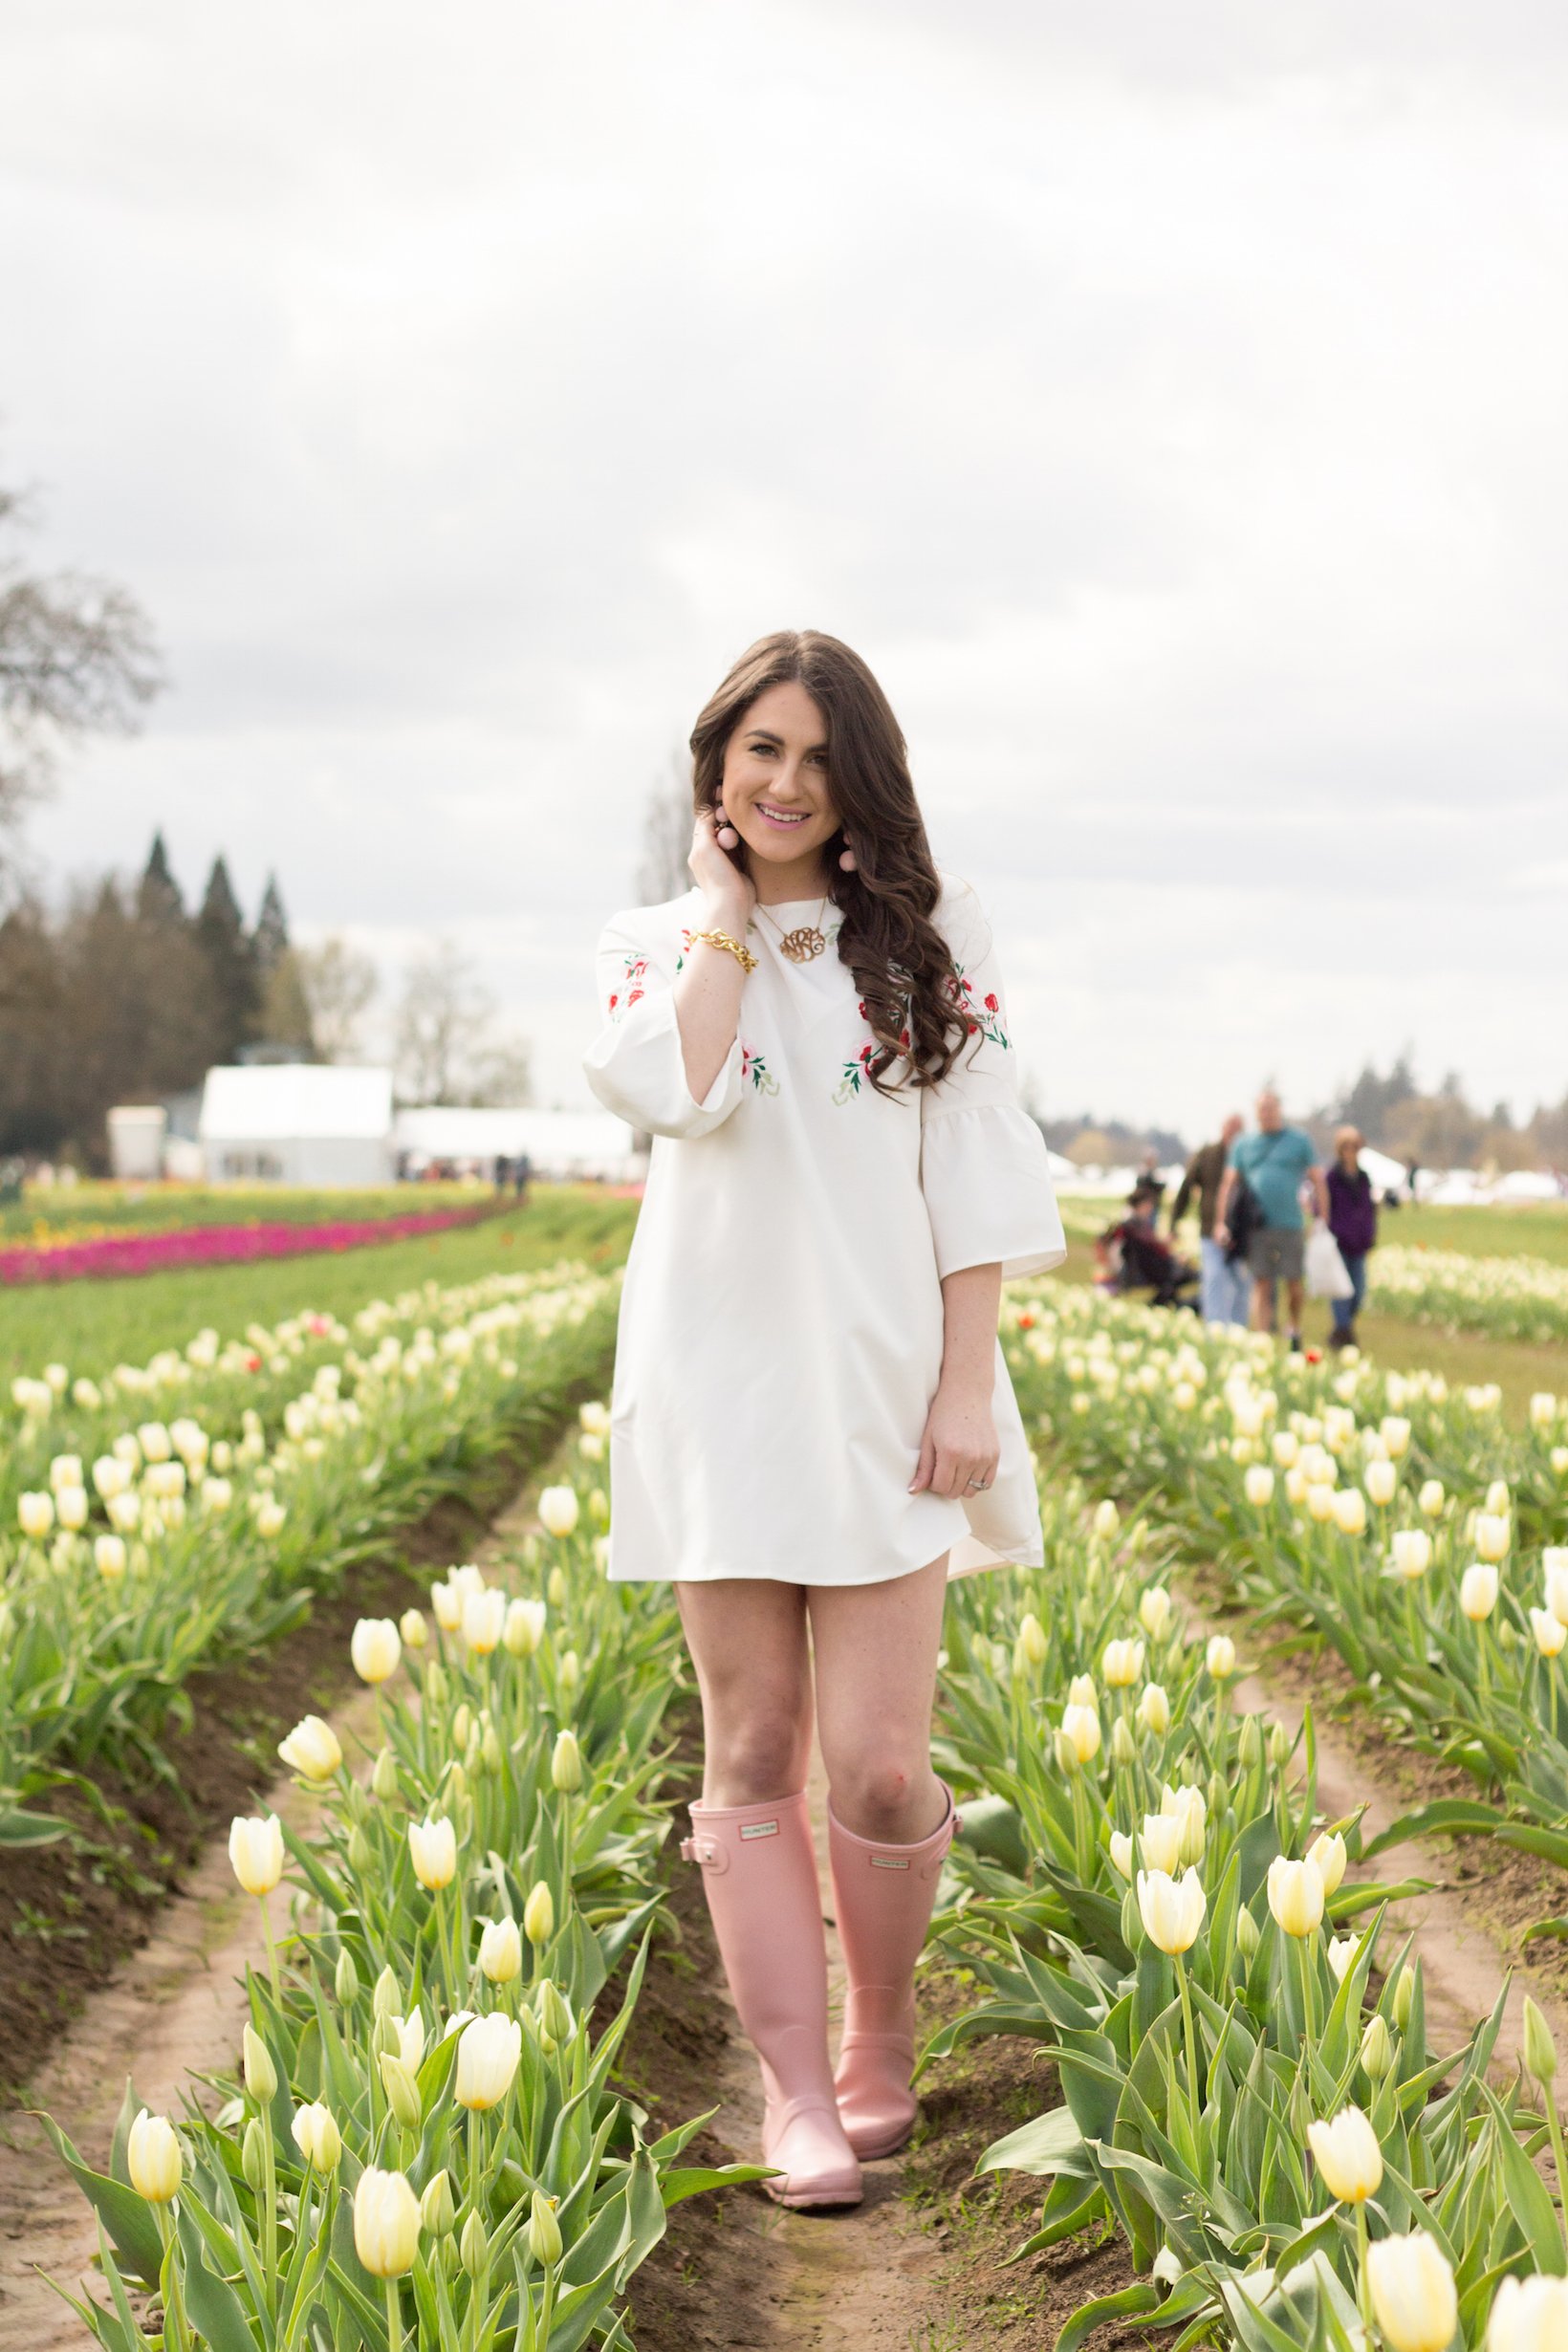 Spring and Easter Dress idea for under $25! - White Spring Dress by popular Portland fashion blogger Topknots and Pearls